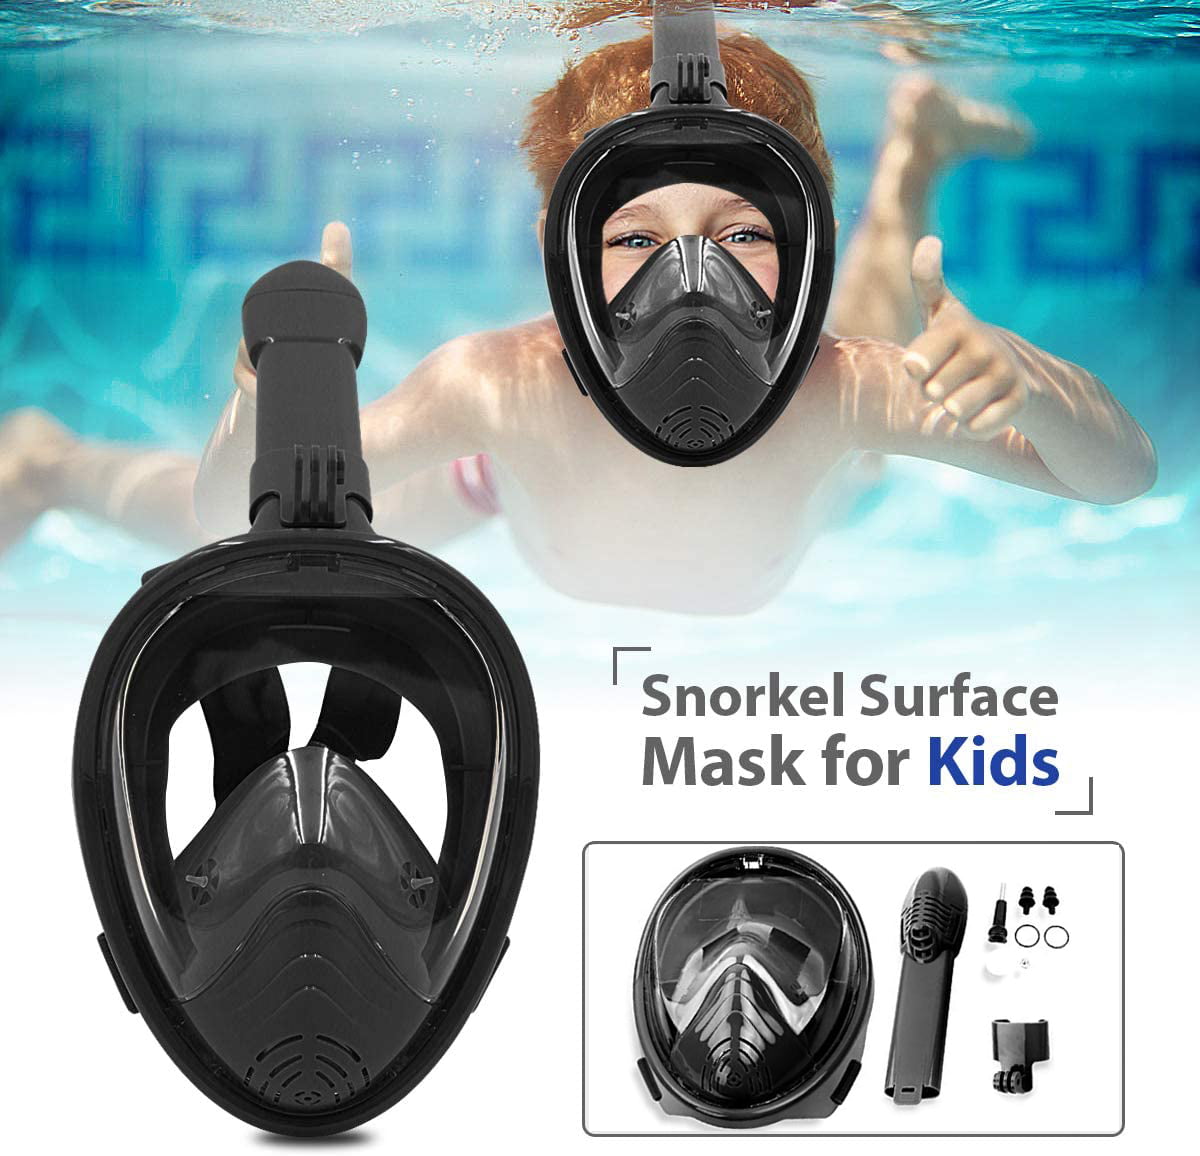 Premium 180 Panoramic View Anti Fog Anti Leak Snorkeling Packages Full Face Snorkel Mask set with Safe Underwater Breathing System Great for Women Men Kid Family Rest Water Swimming Silicone Mask 